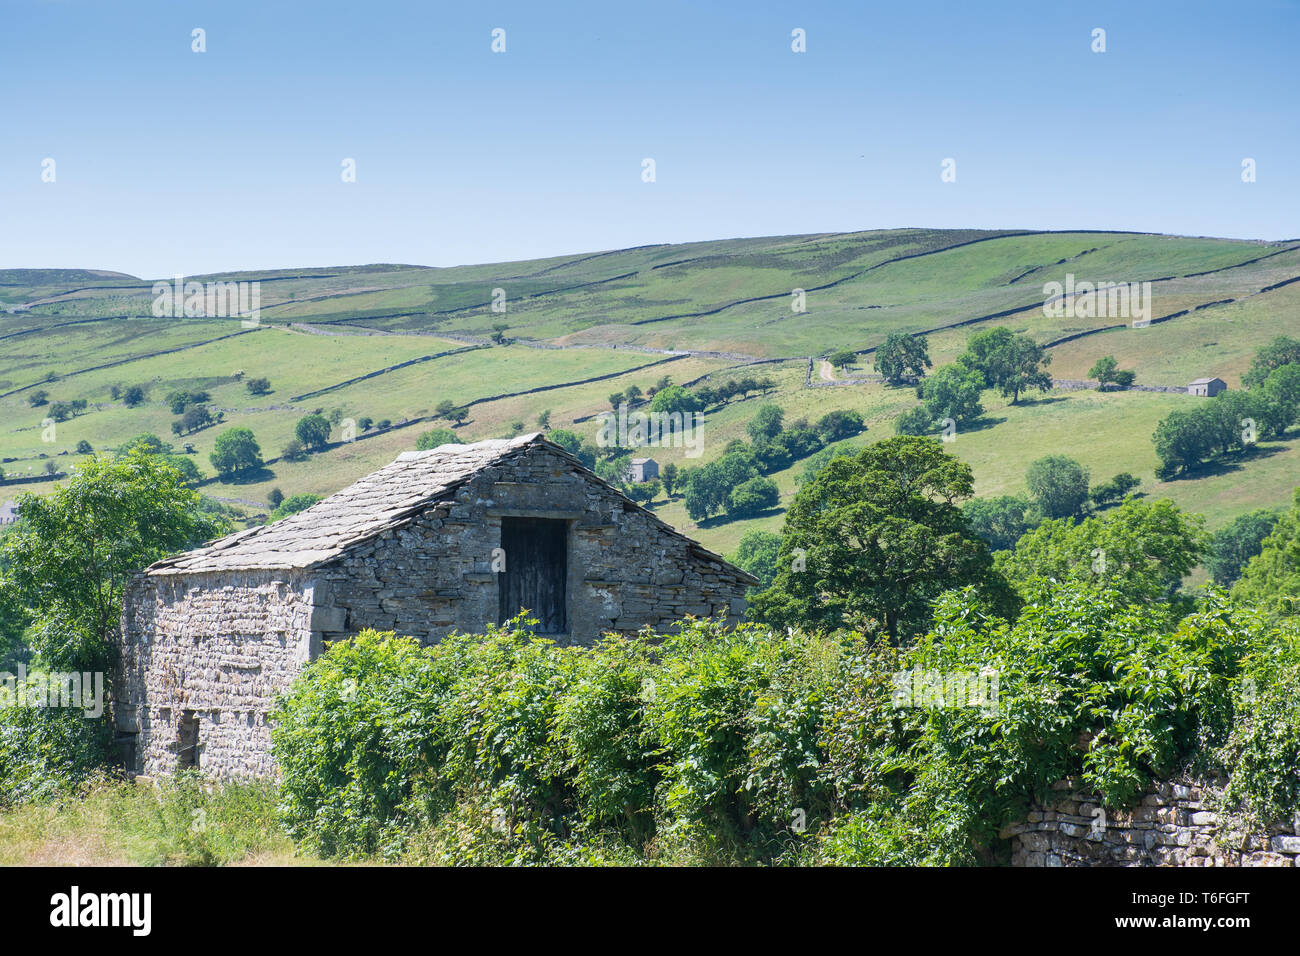 Yorkshire Dales with stone farm building in foreground Stock Photo